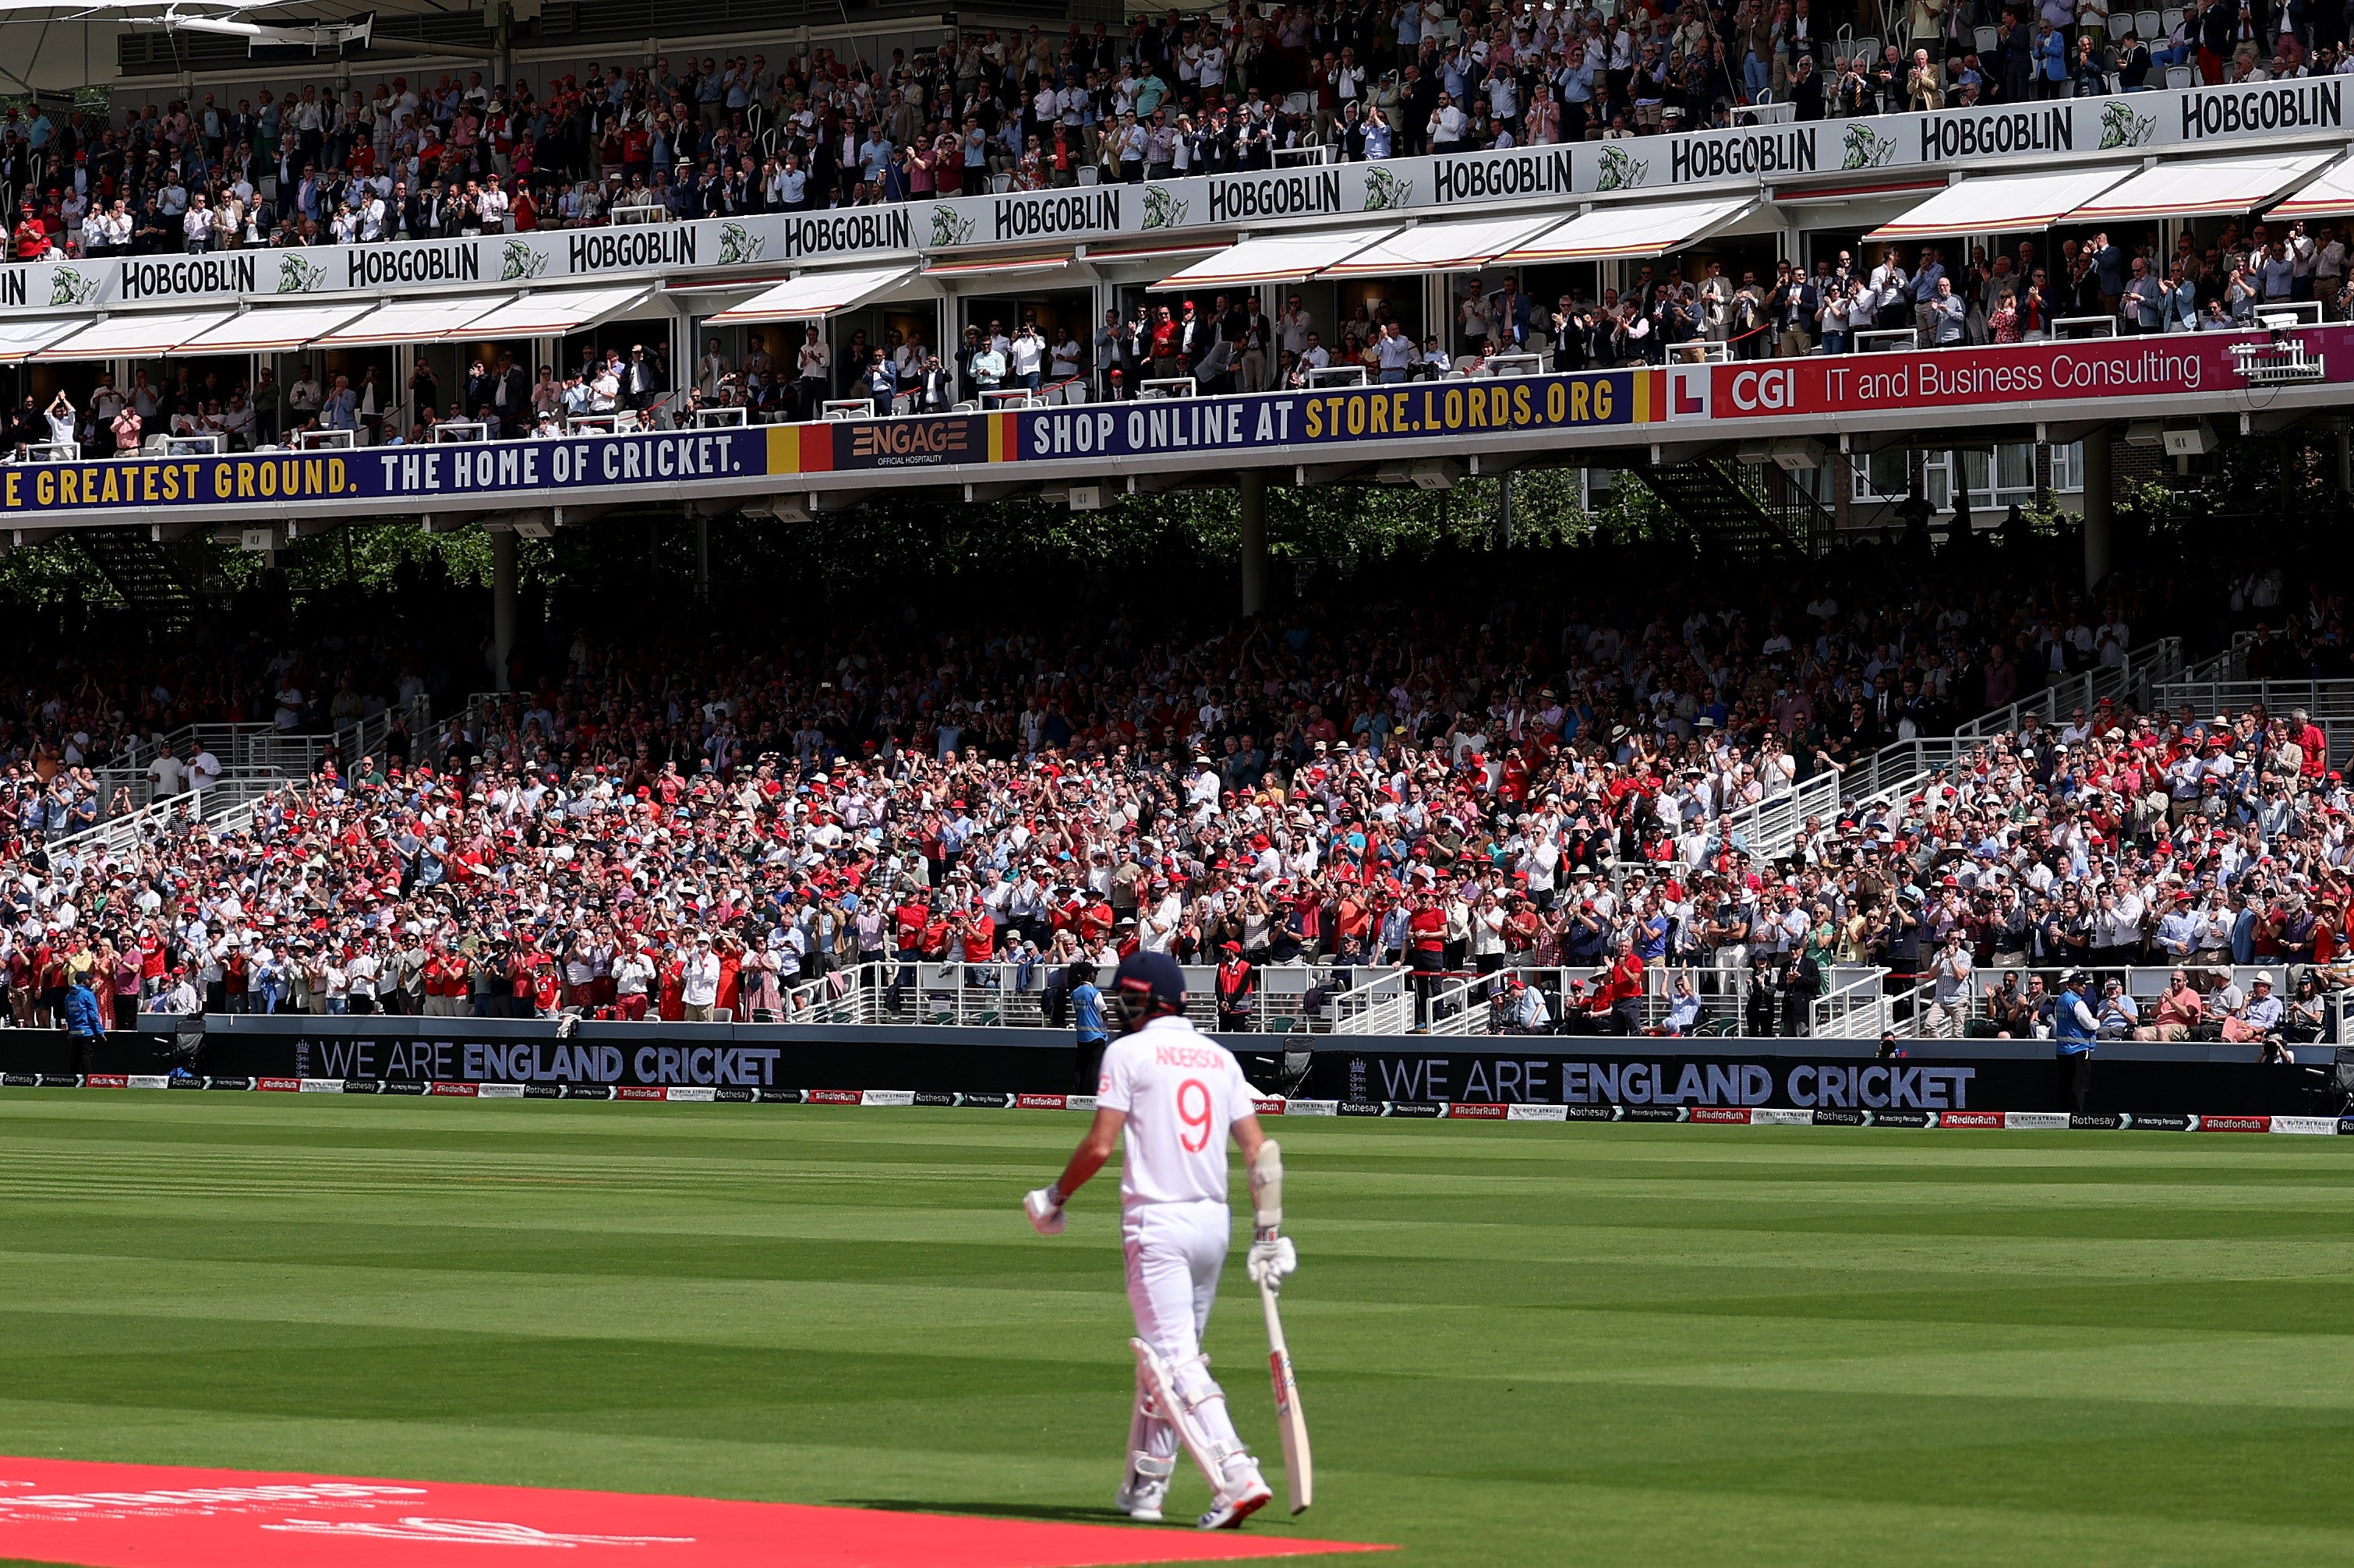 Anderson did not face a ball in what is likely to be his final innings for England